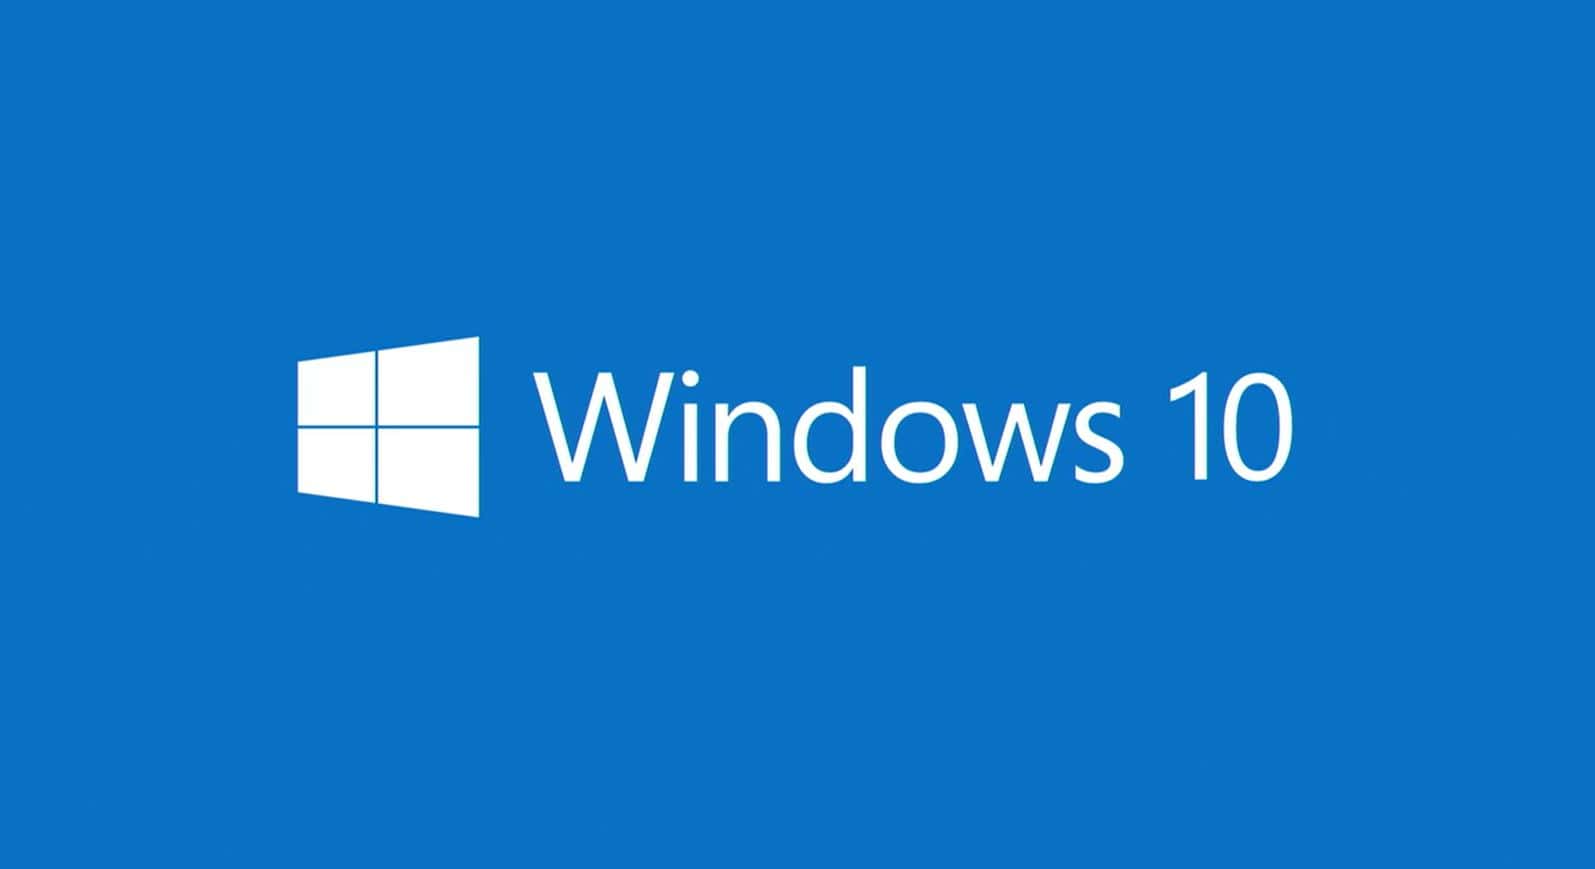 Windows 10 licenses are no longer available on Microsoft website today, January 31